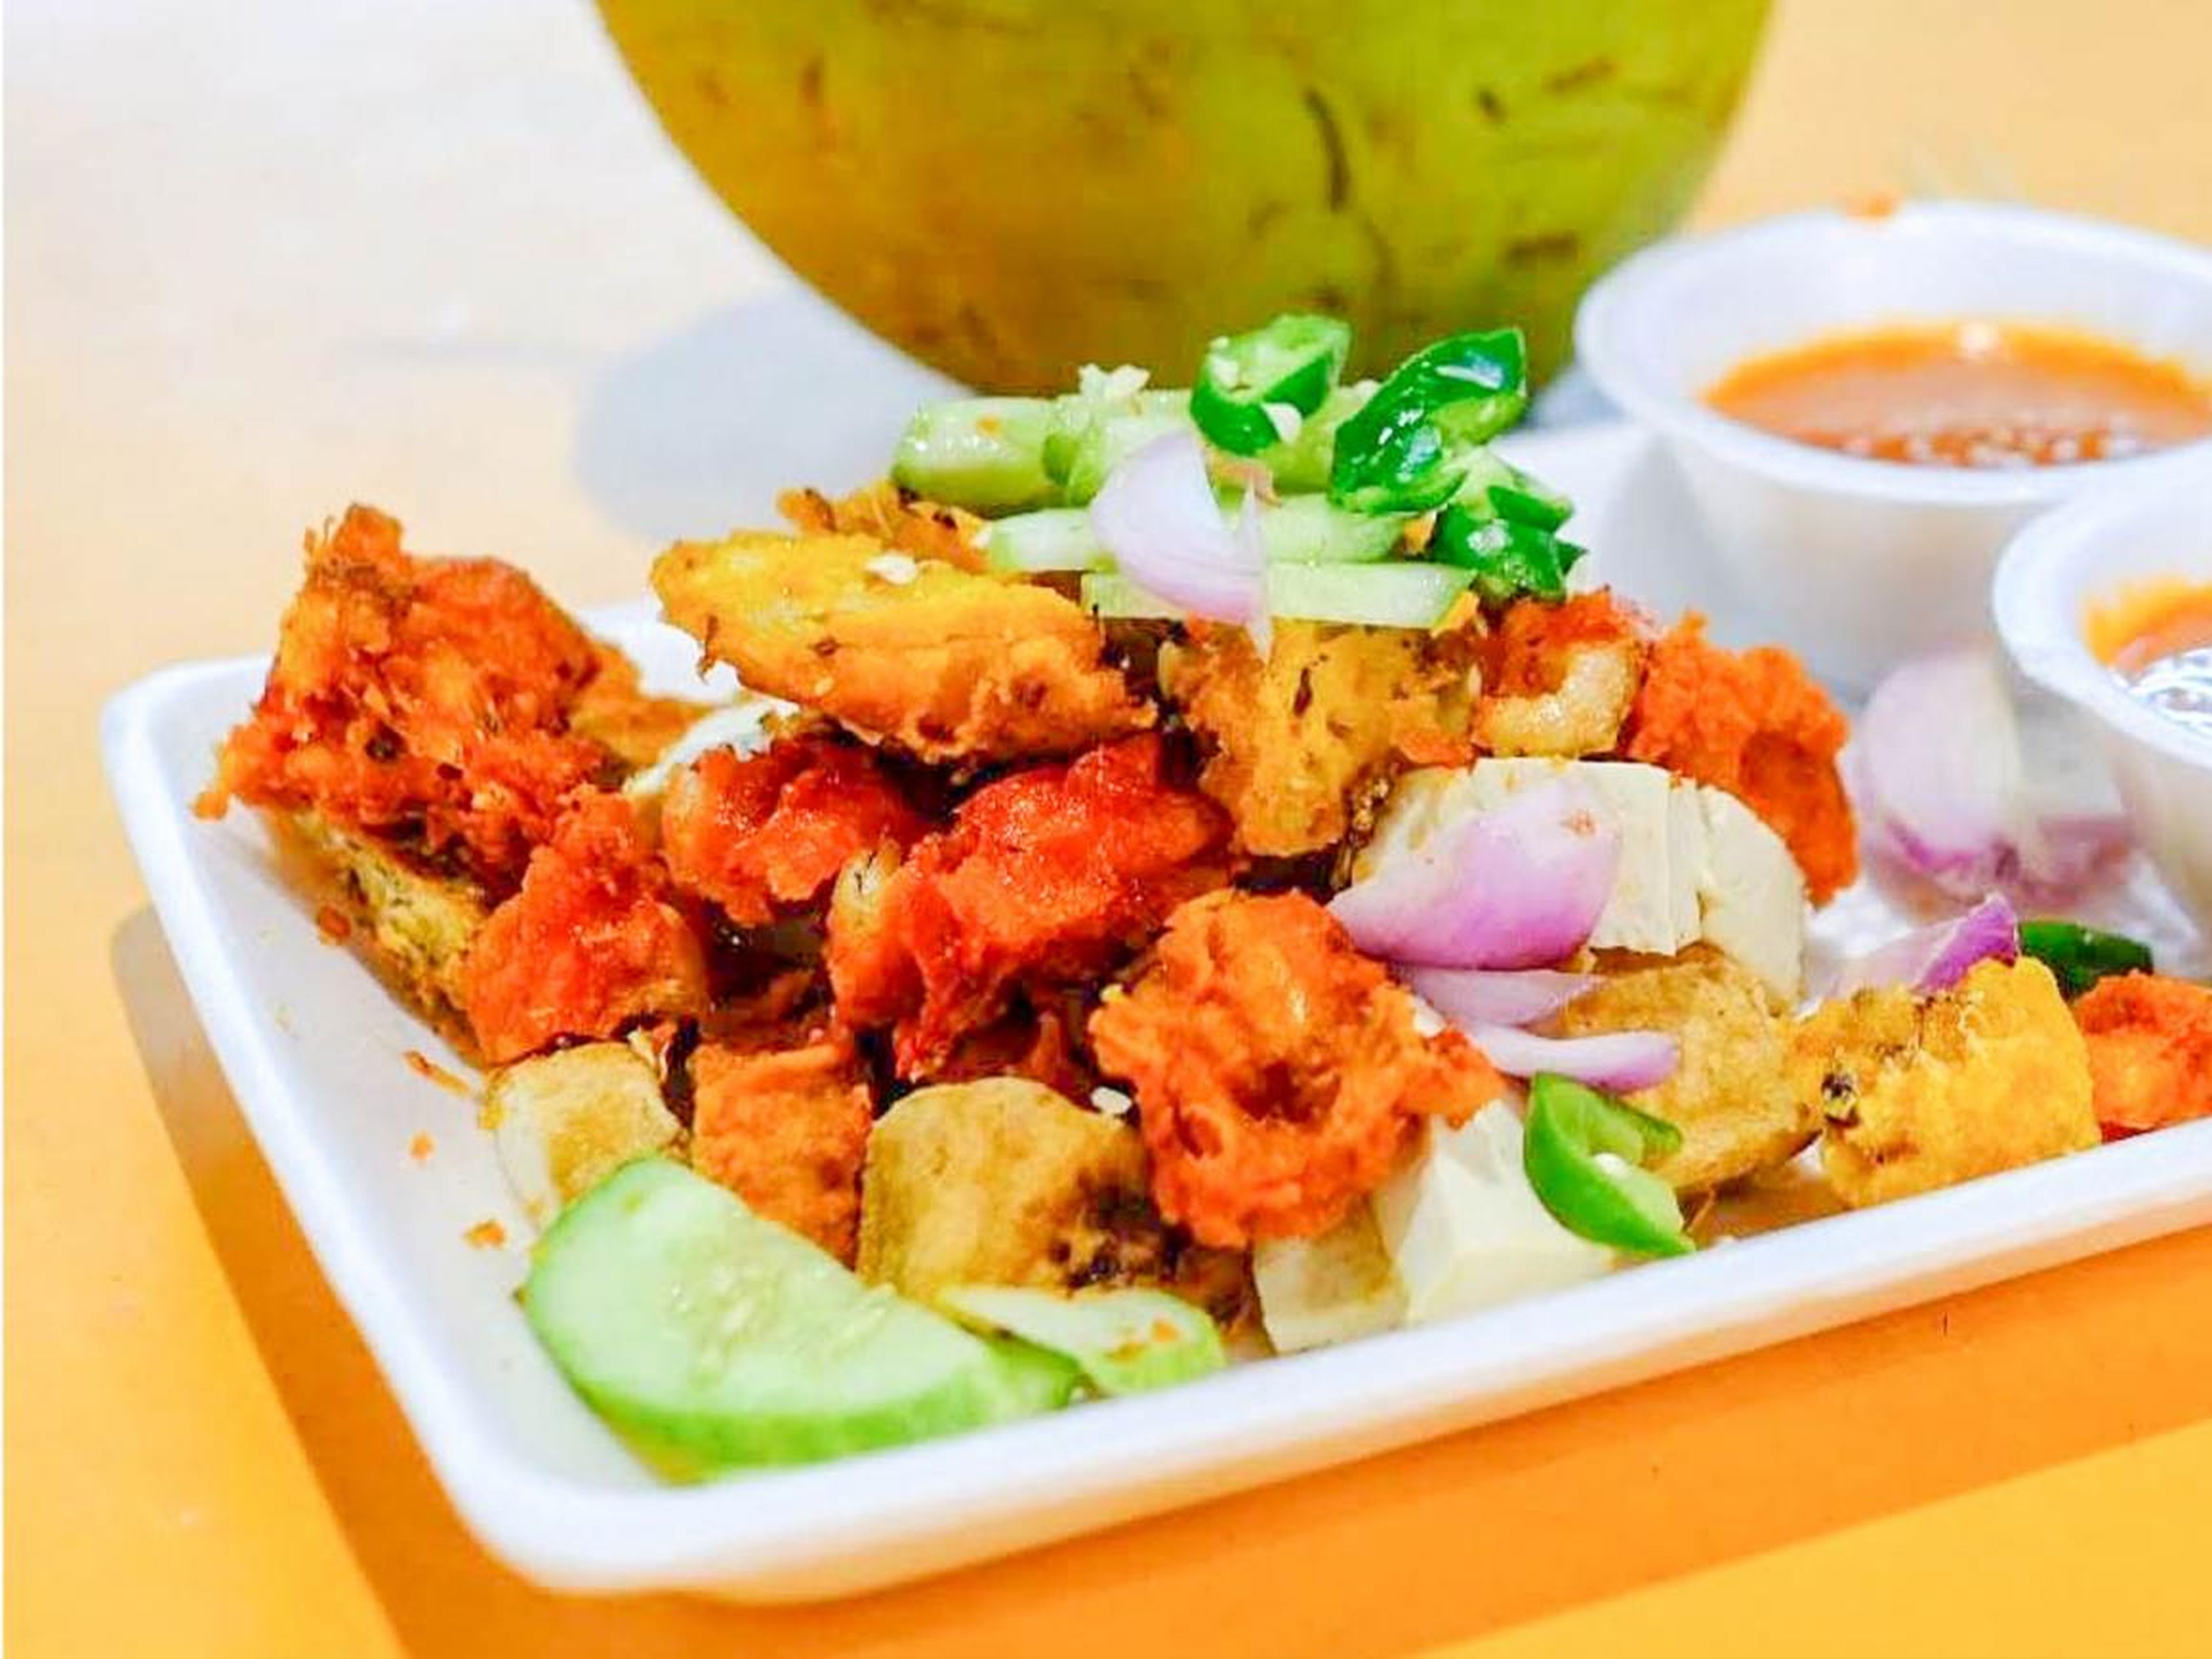 One of my favorite Singaporean dishes was rojak, a traditional fruit and vegetable salad. There are different types of rojak with Chinese, Indian, or Malay flavors, but the basic idea is that you select what you want in your salad